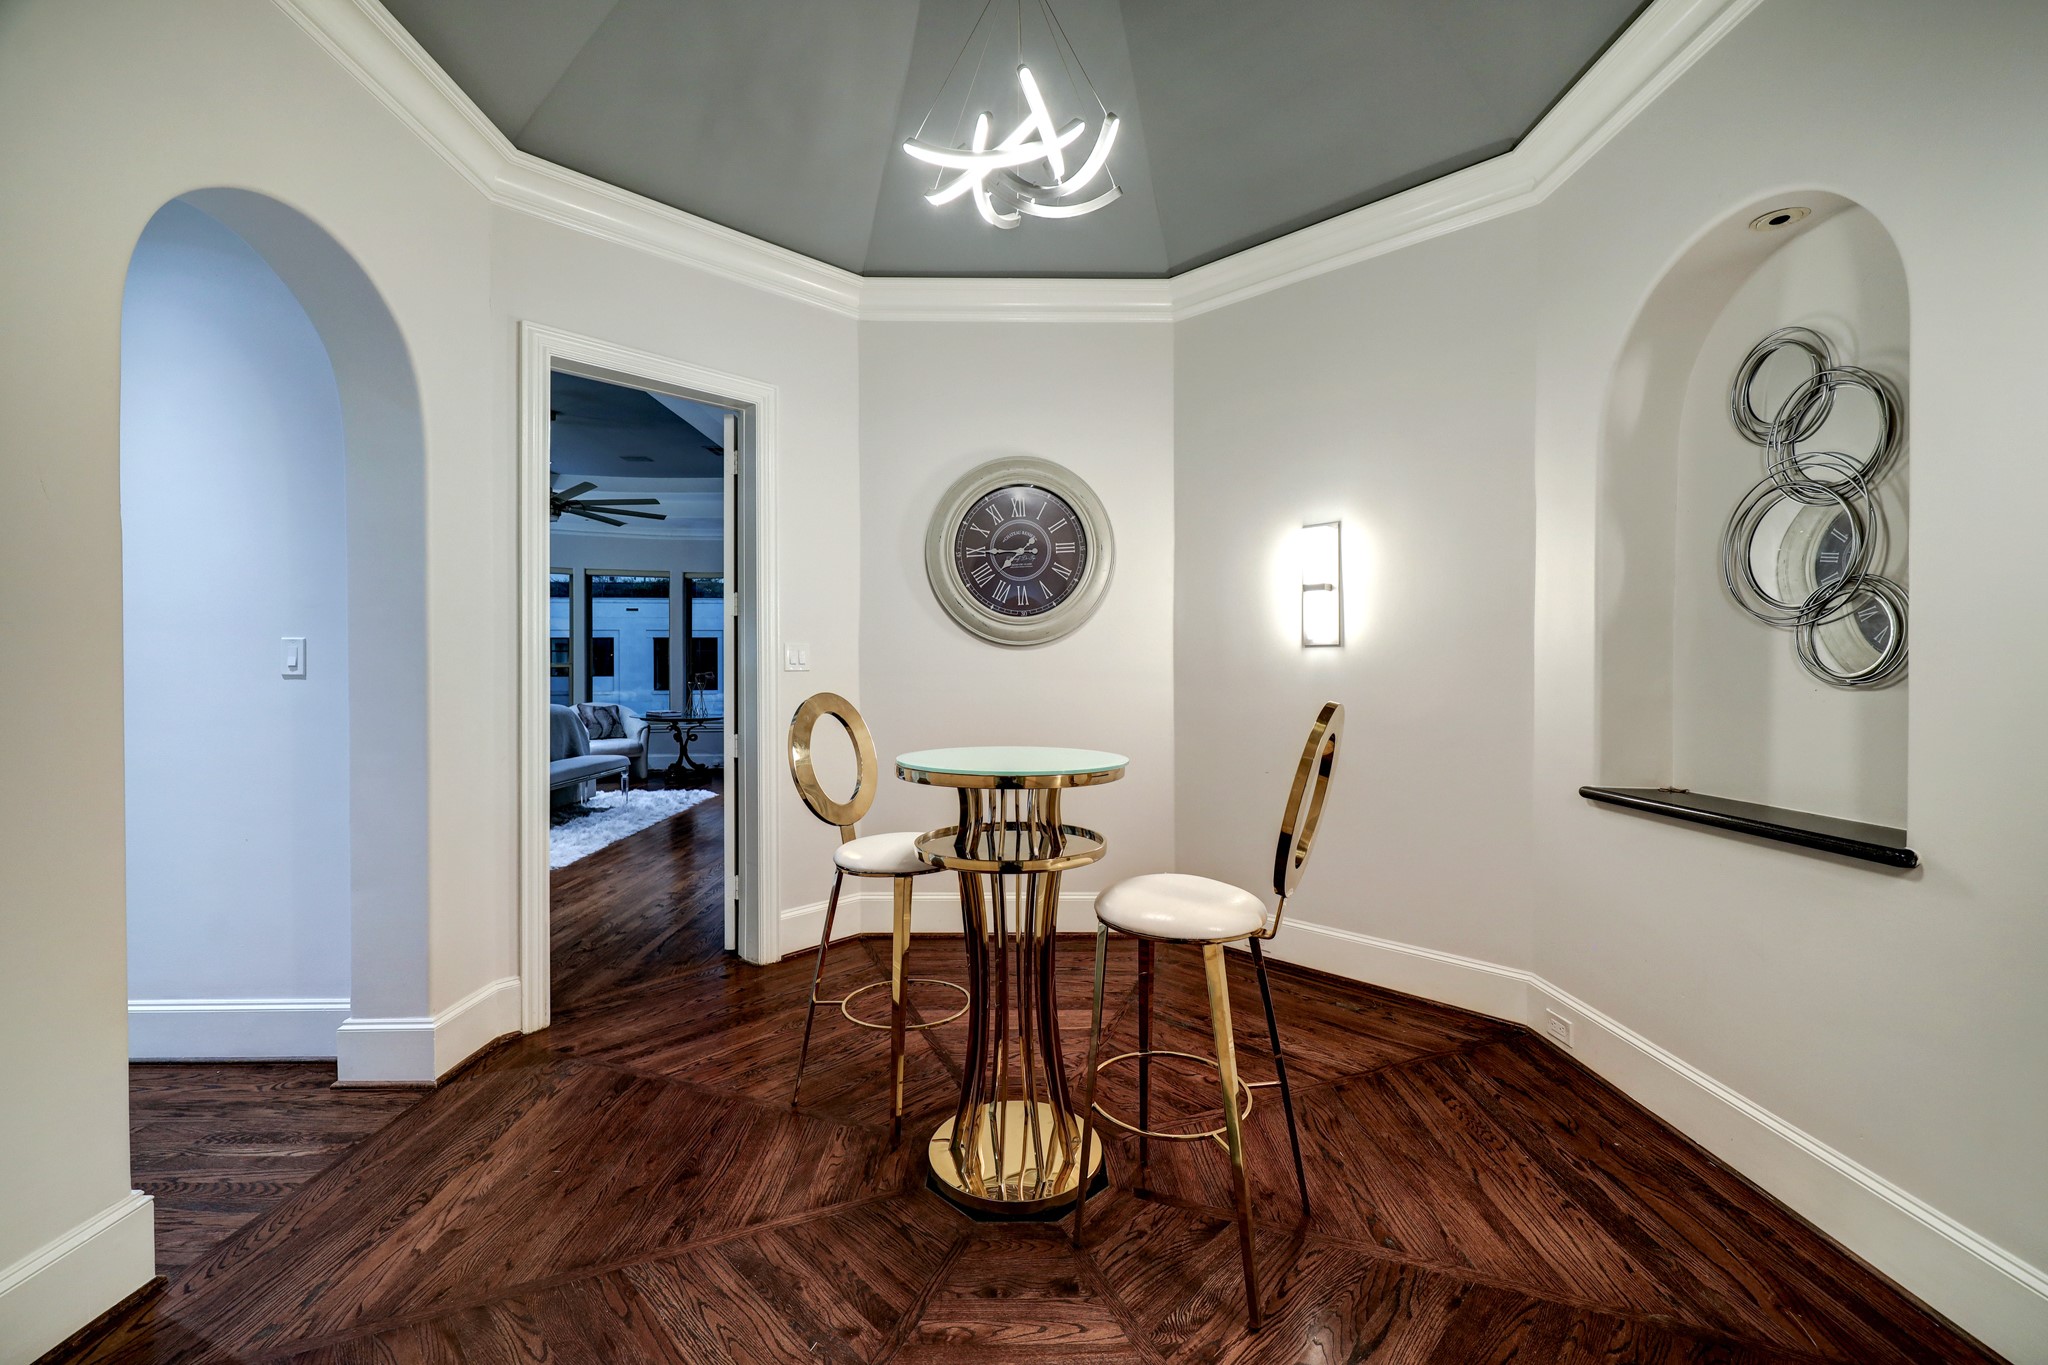 The Primary Vestibule features octagonally laid hardwood floors, octagonally domed ceiling, lit art niches, and crown molding & baseboards.